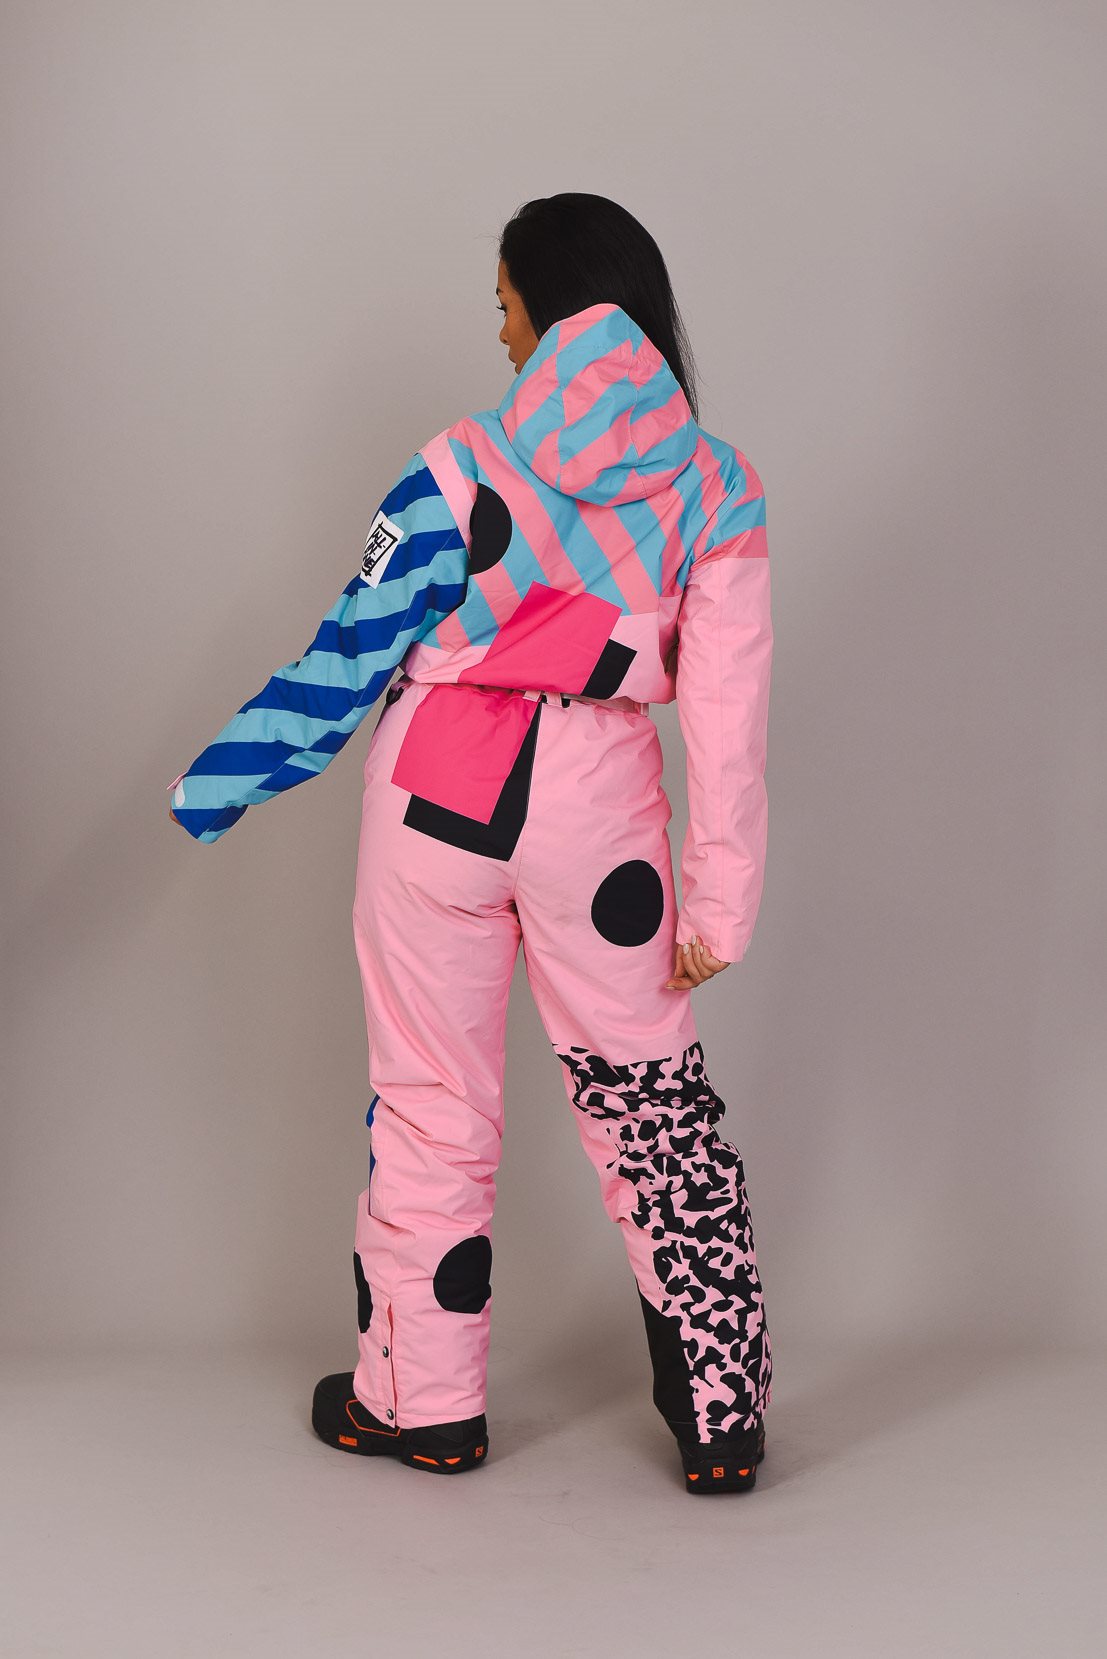 Penfold in Pink Ski Suit - Women's Curved